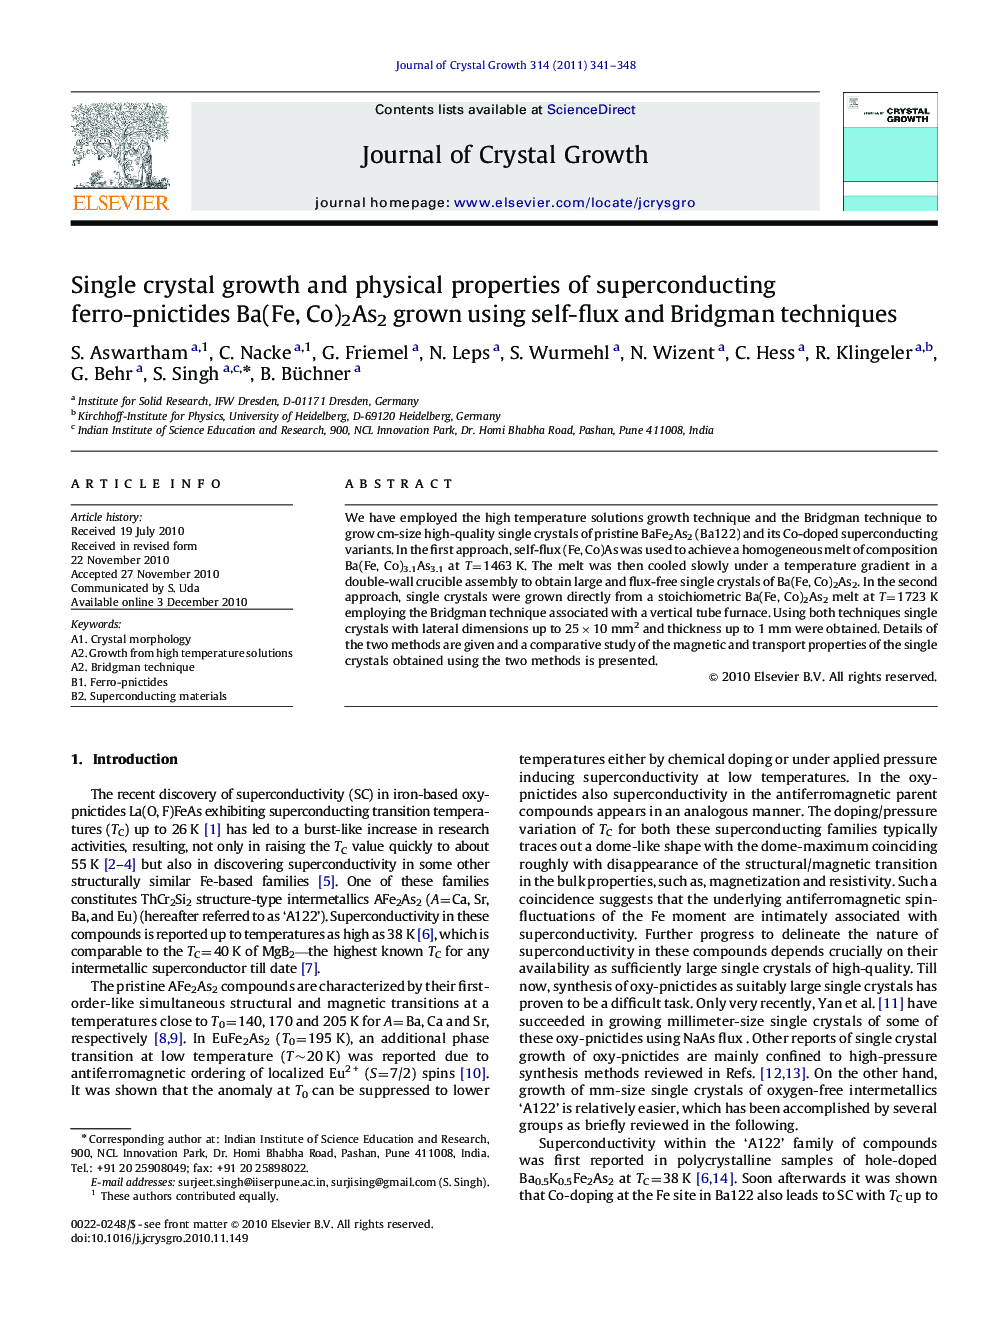 Single crystal growth and physical properties of superconducting ferro-pnictides Ba(Fe, Co)2As2 grown using self-flux and Bridgman techniques